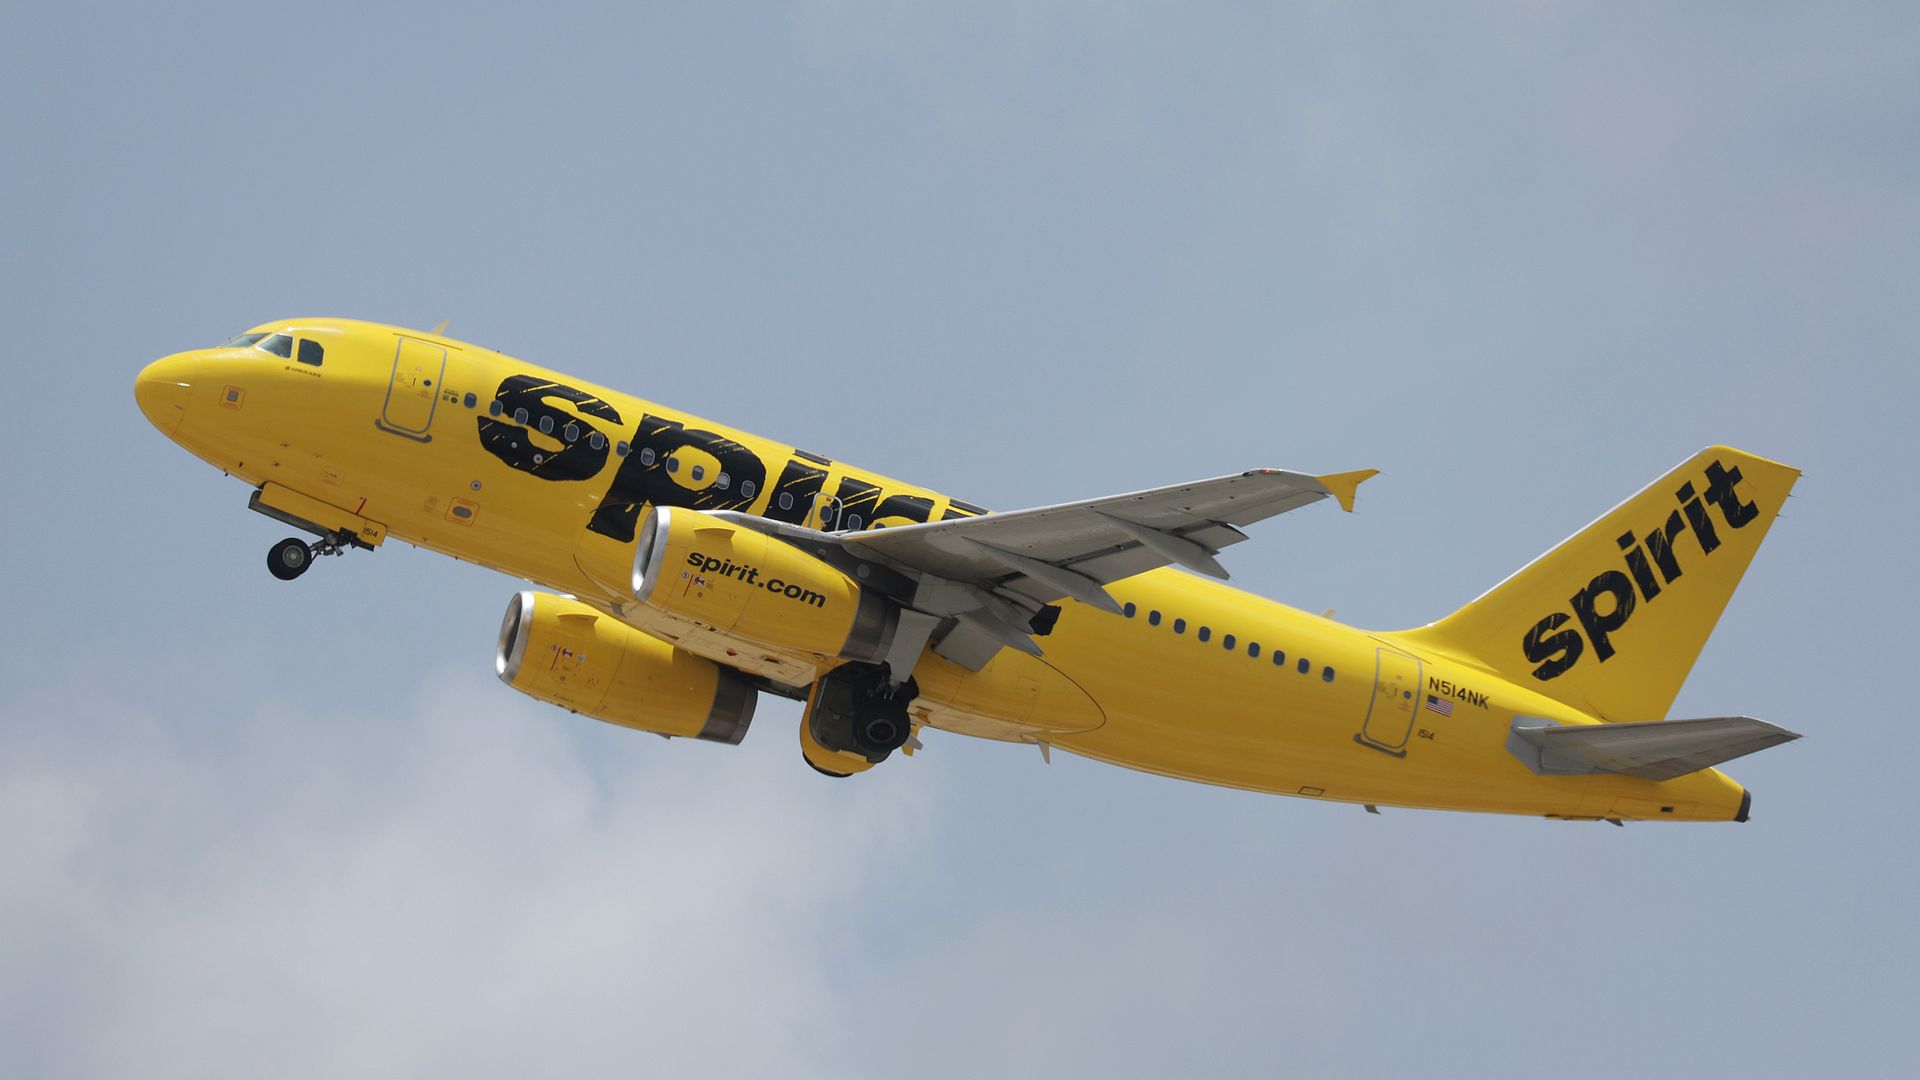 A yellow plane with black lettering flying through the sky